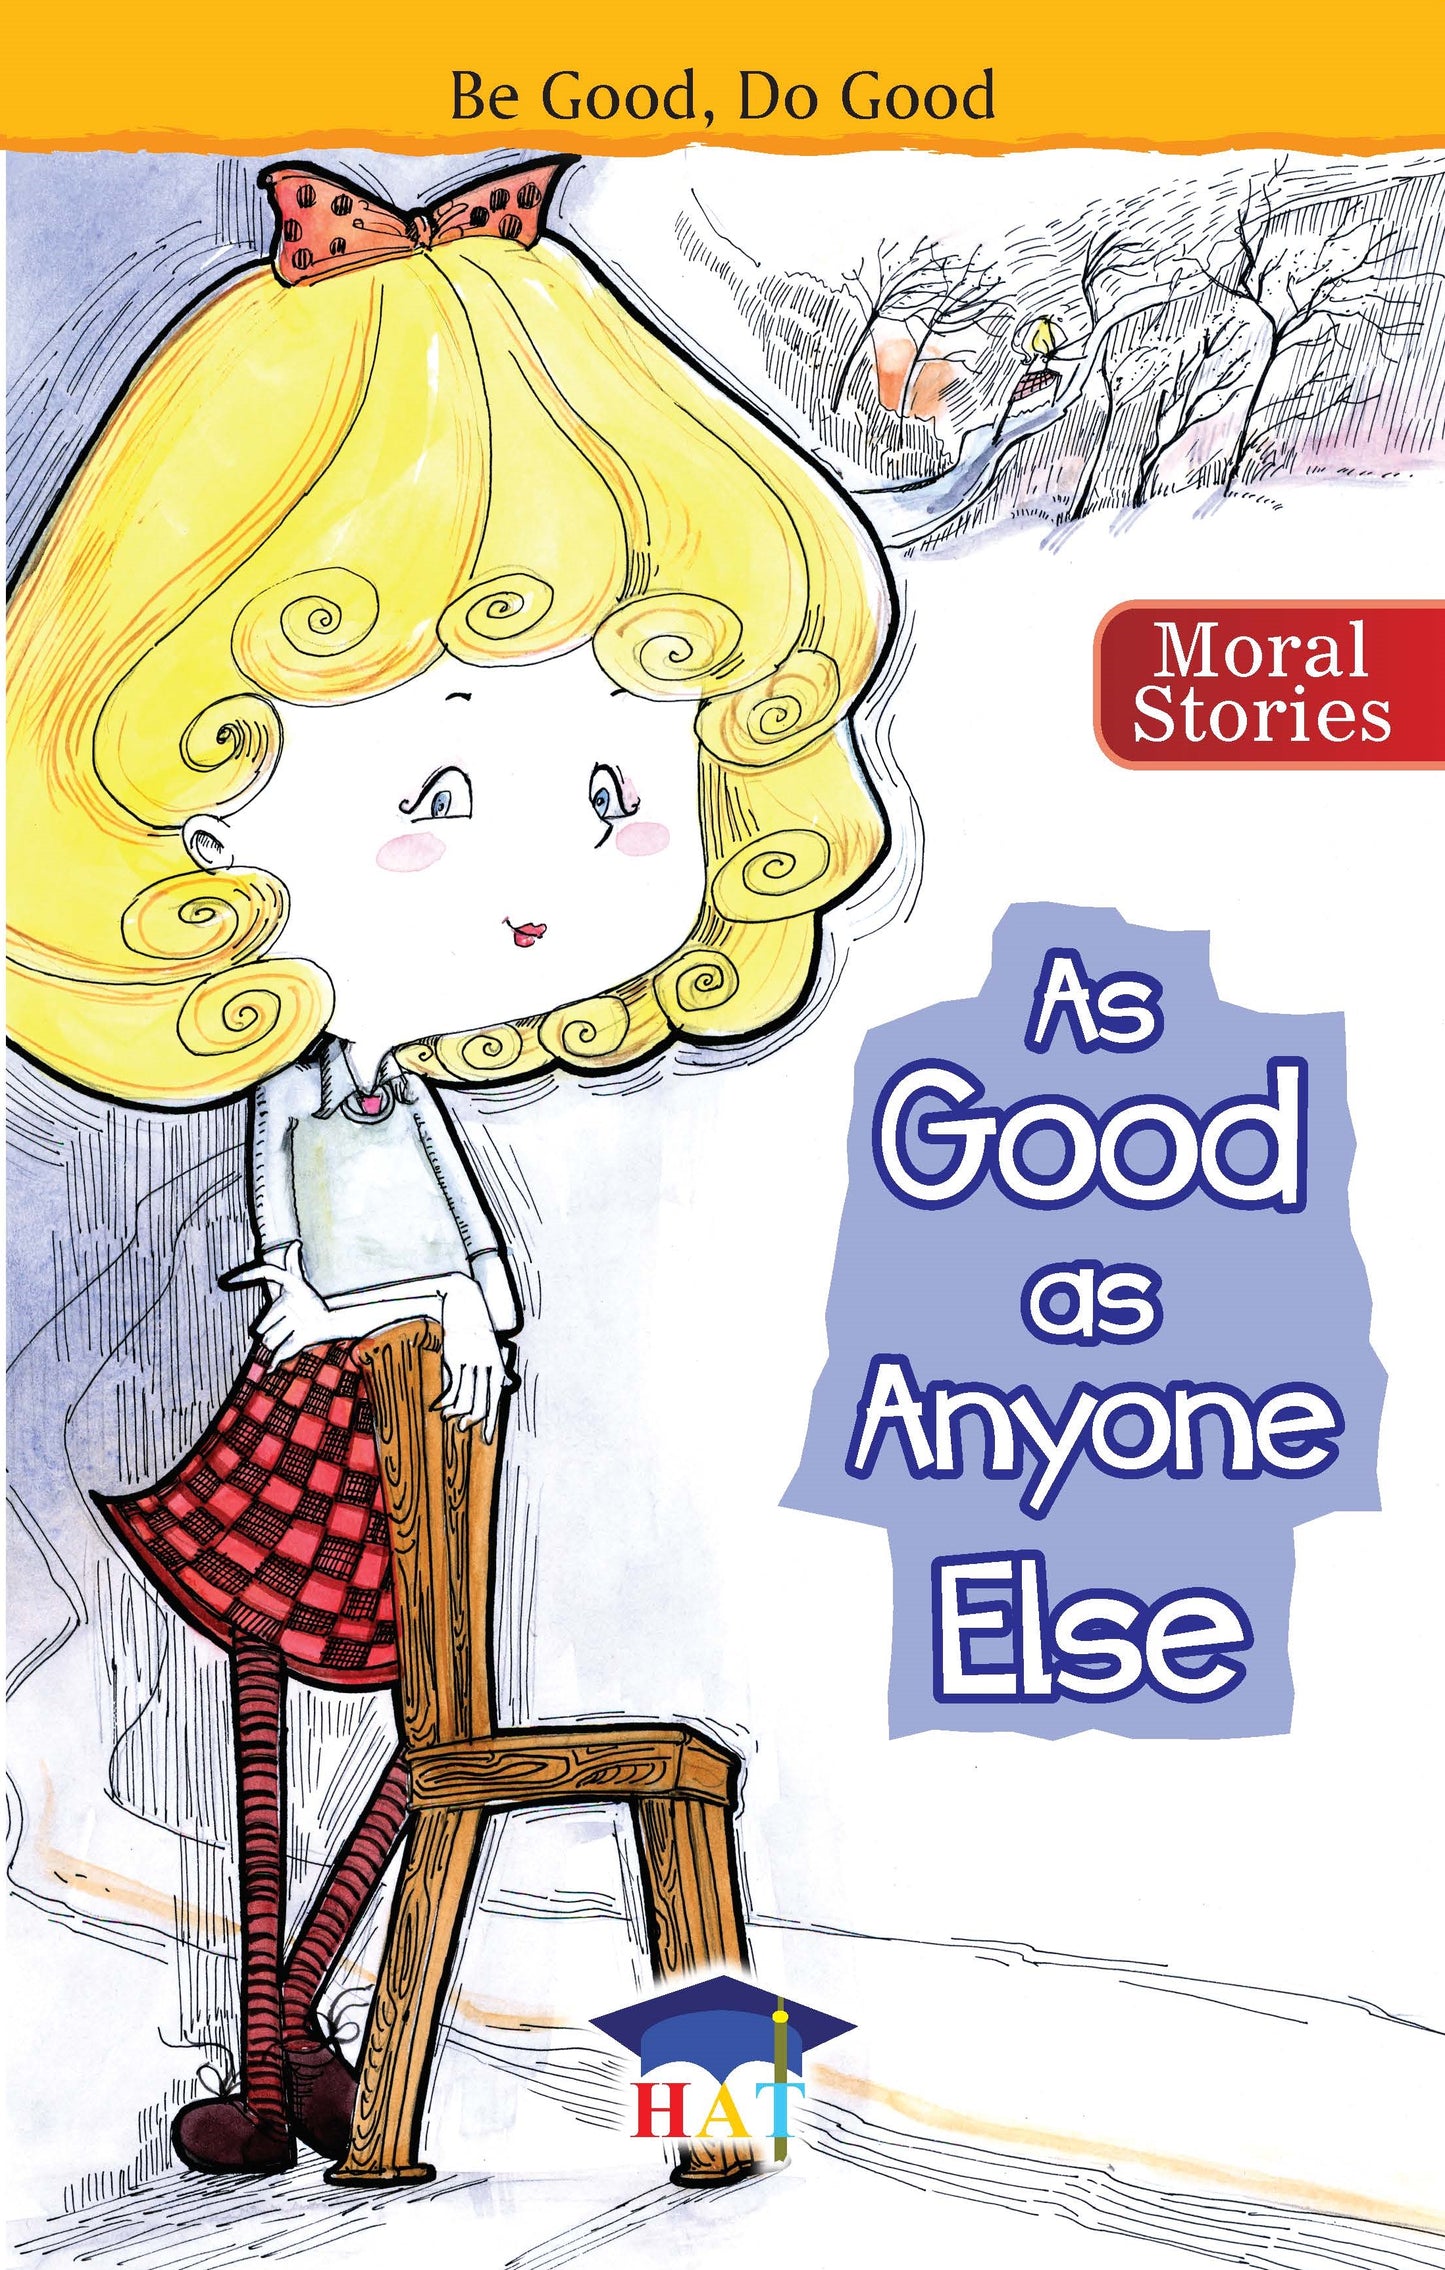 Be Good, Do Good - Moral Stories 1/8